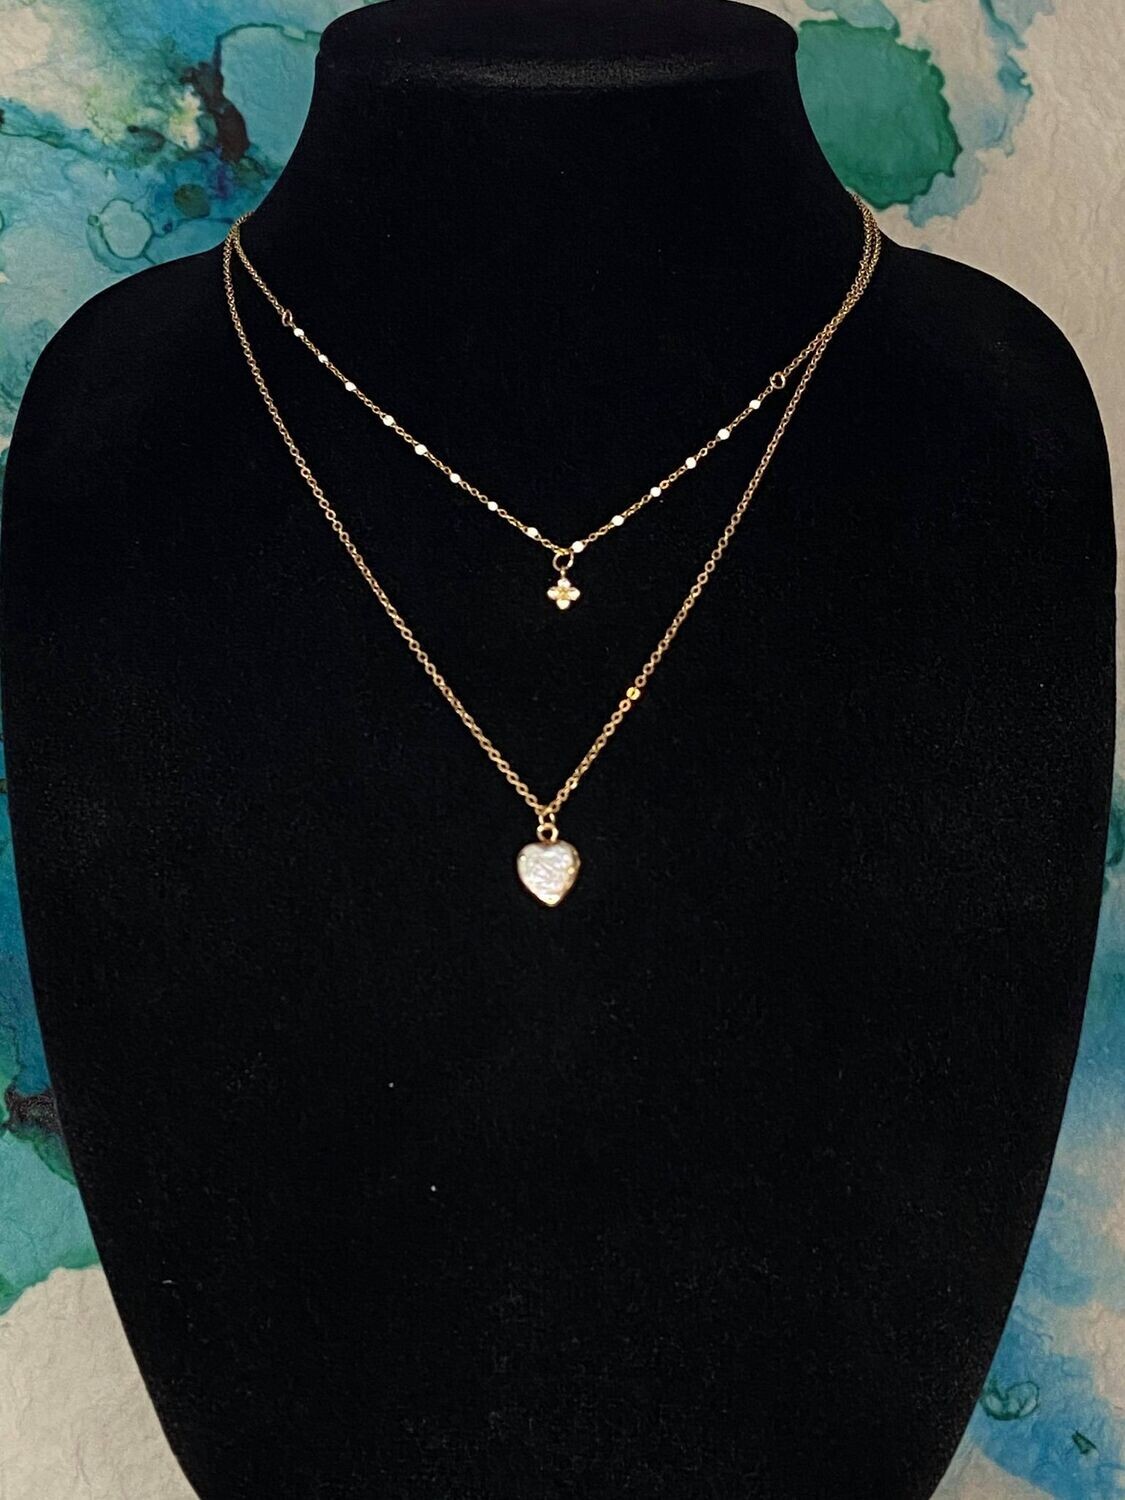 $14.99 pearl heart necklace